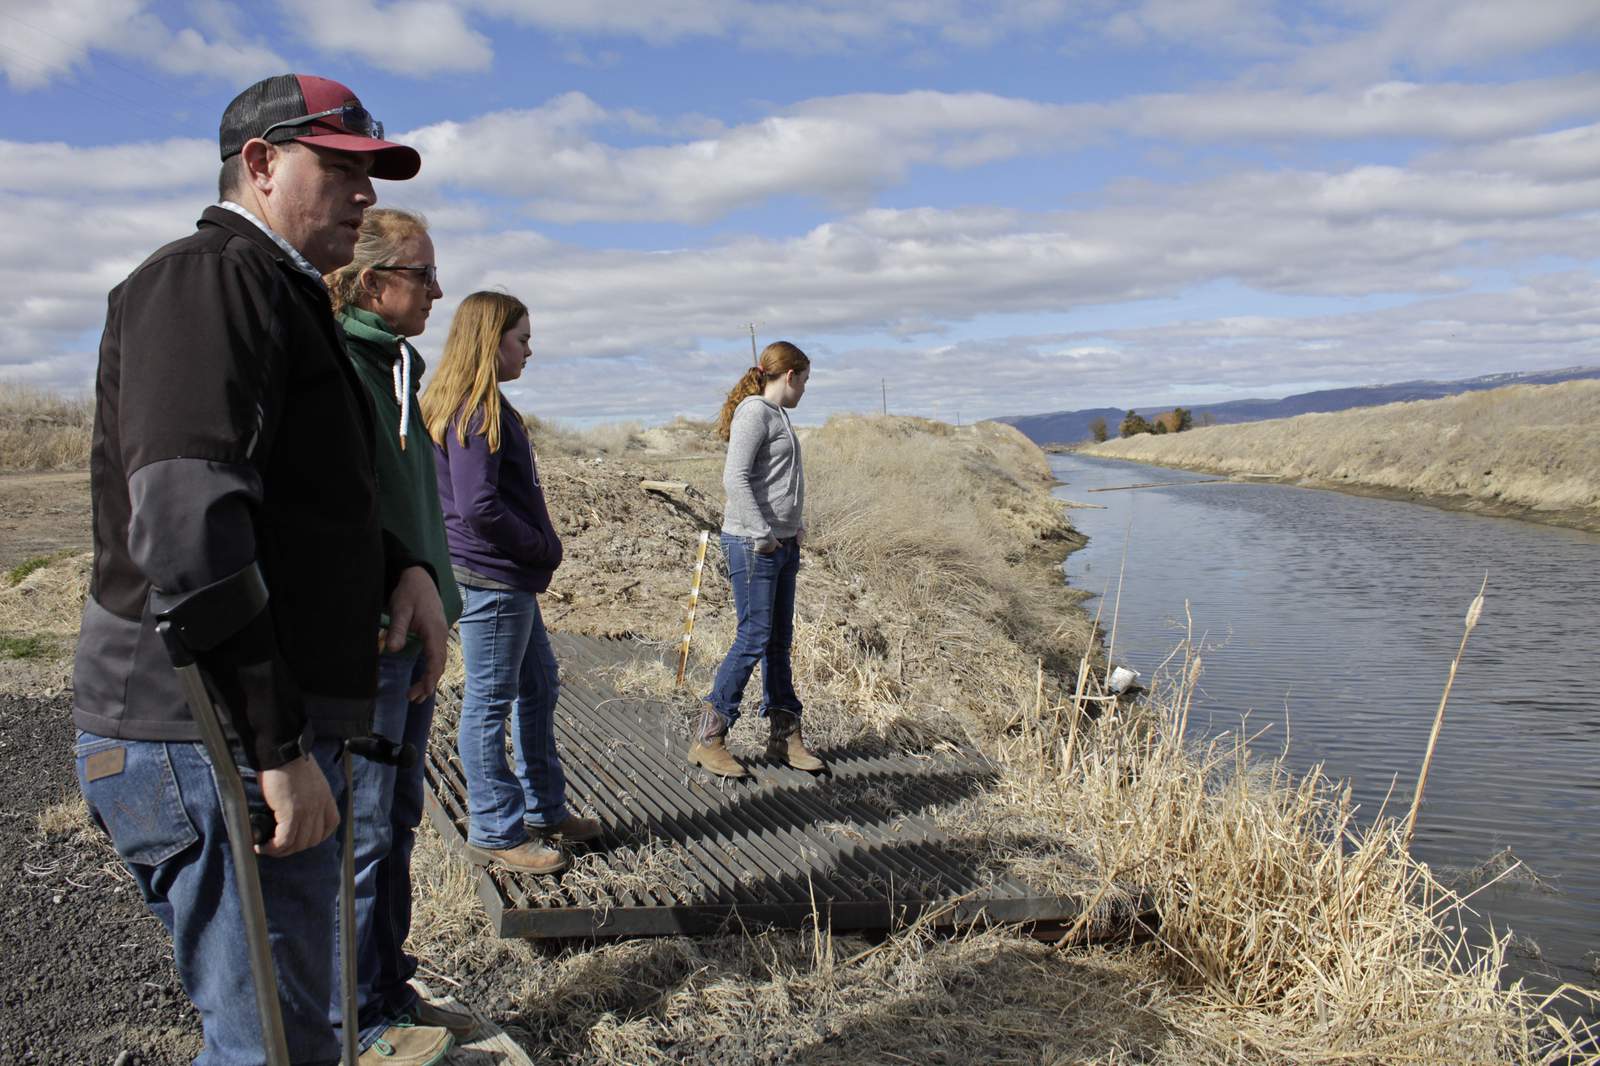 Epic drought means water crisis on Oregon-California border